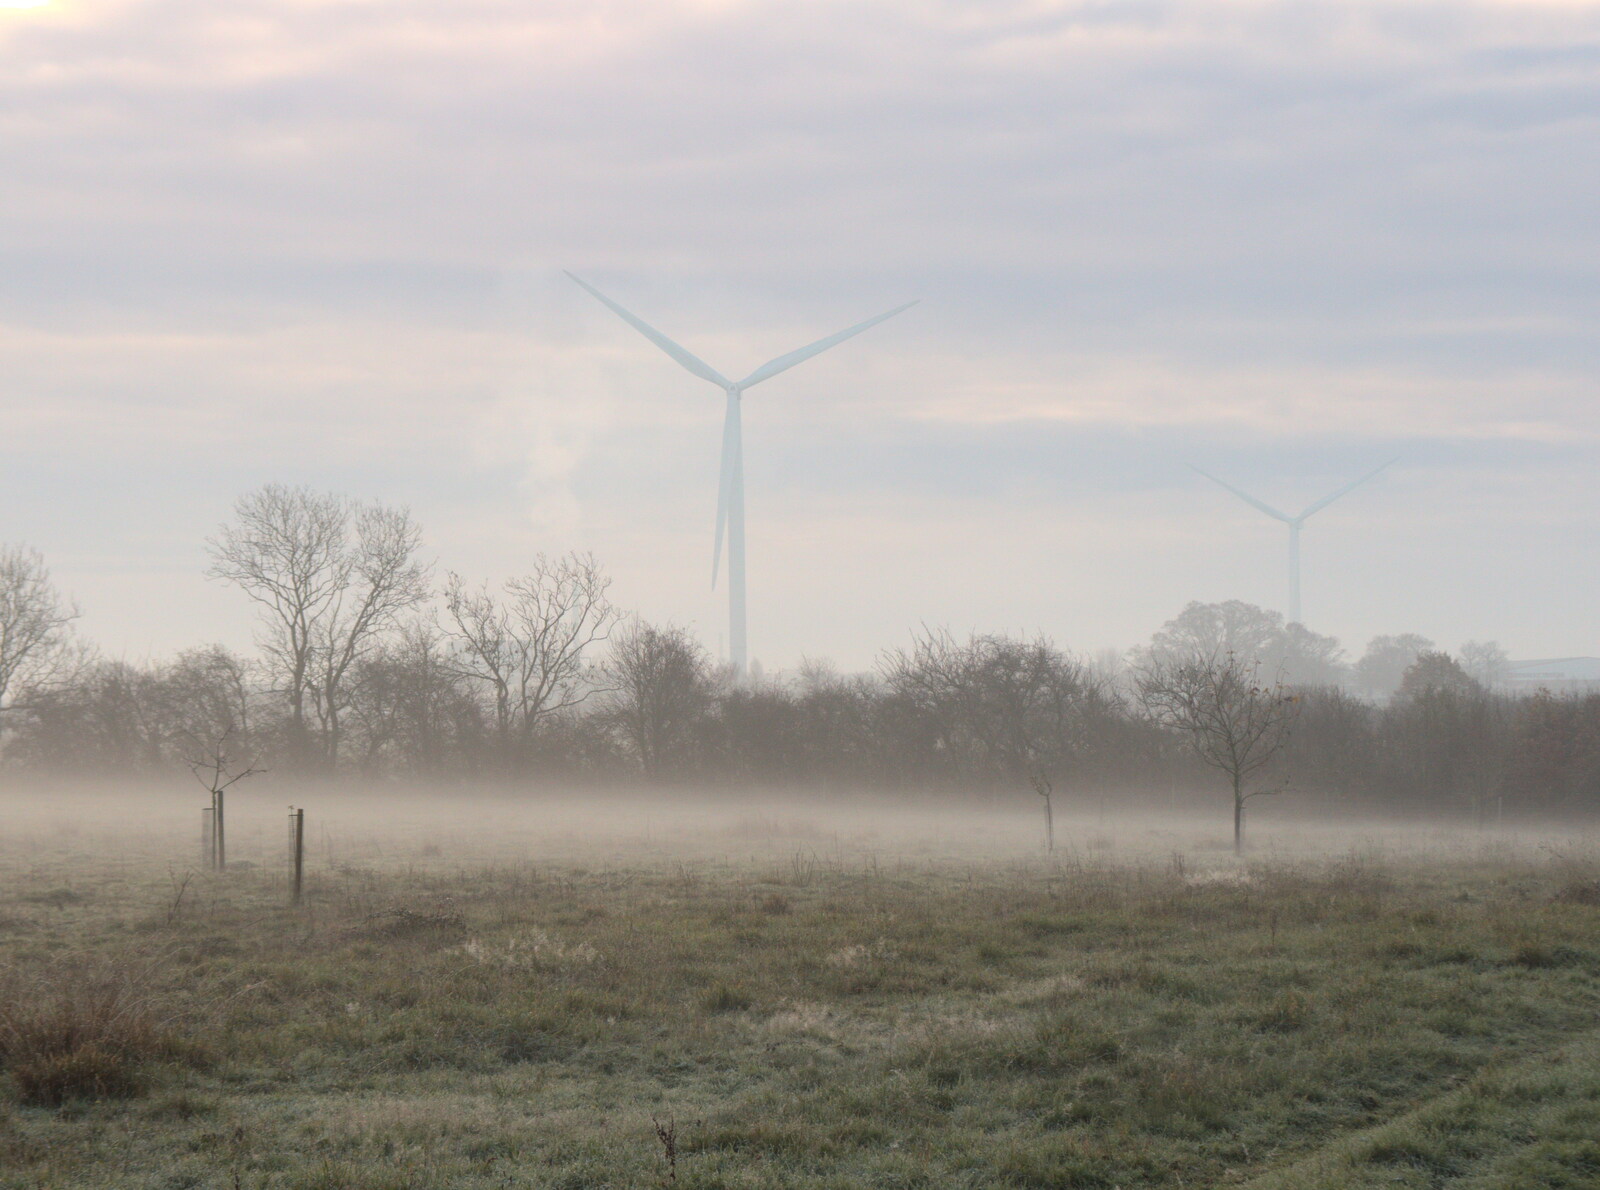 Turbines loom out of the mist from Frosty Rides and a Christmas Tree, Diss Garden Centre, Diss, Norfolk - 29th November 2020